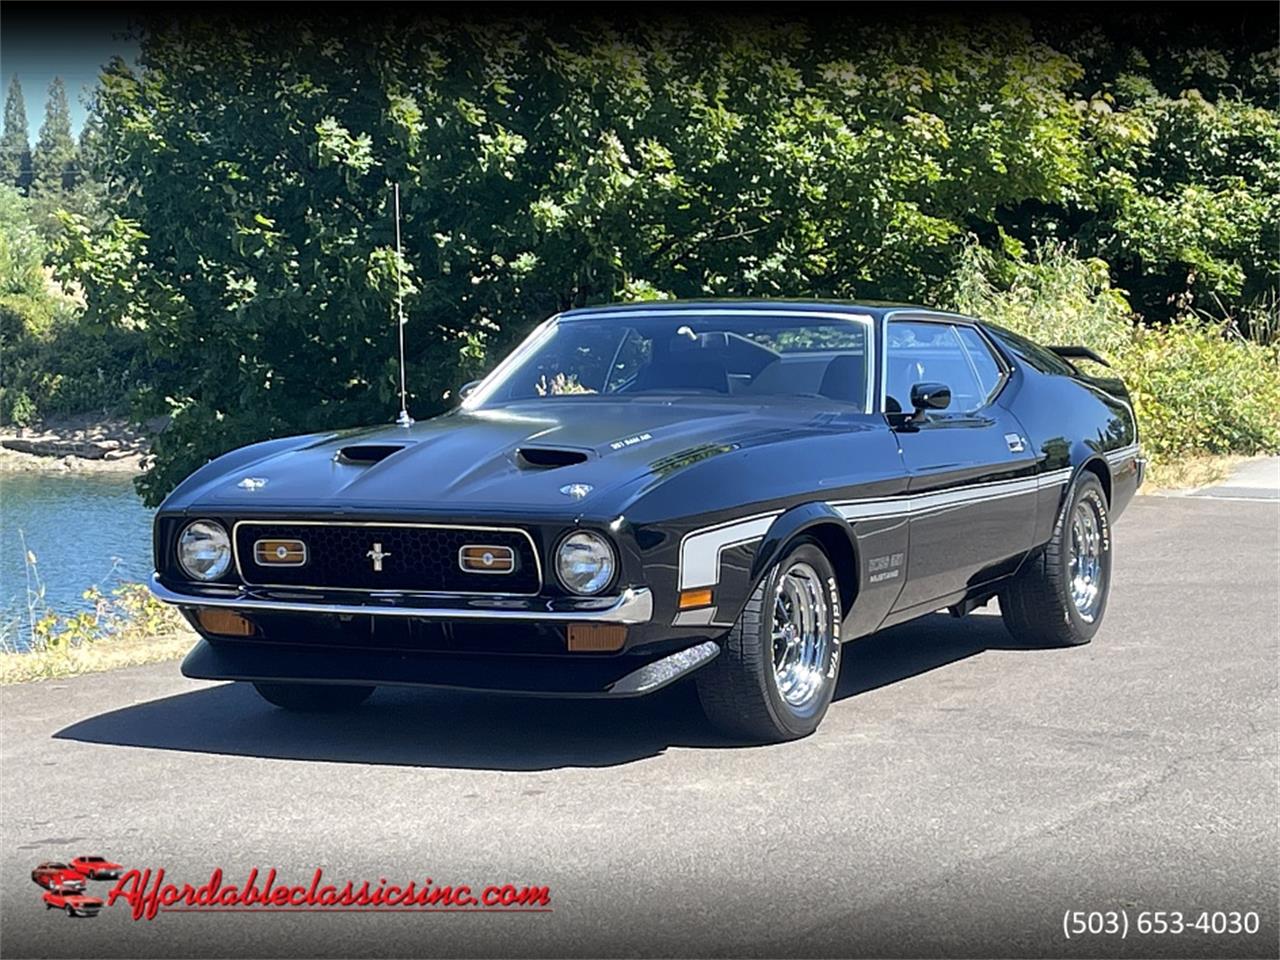 For Sale: 1971 Ford Mustang in Gladstone, Oregon for sale in Gladstone, OR